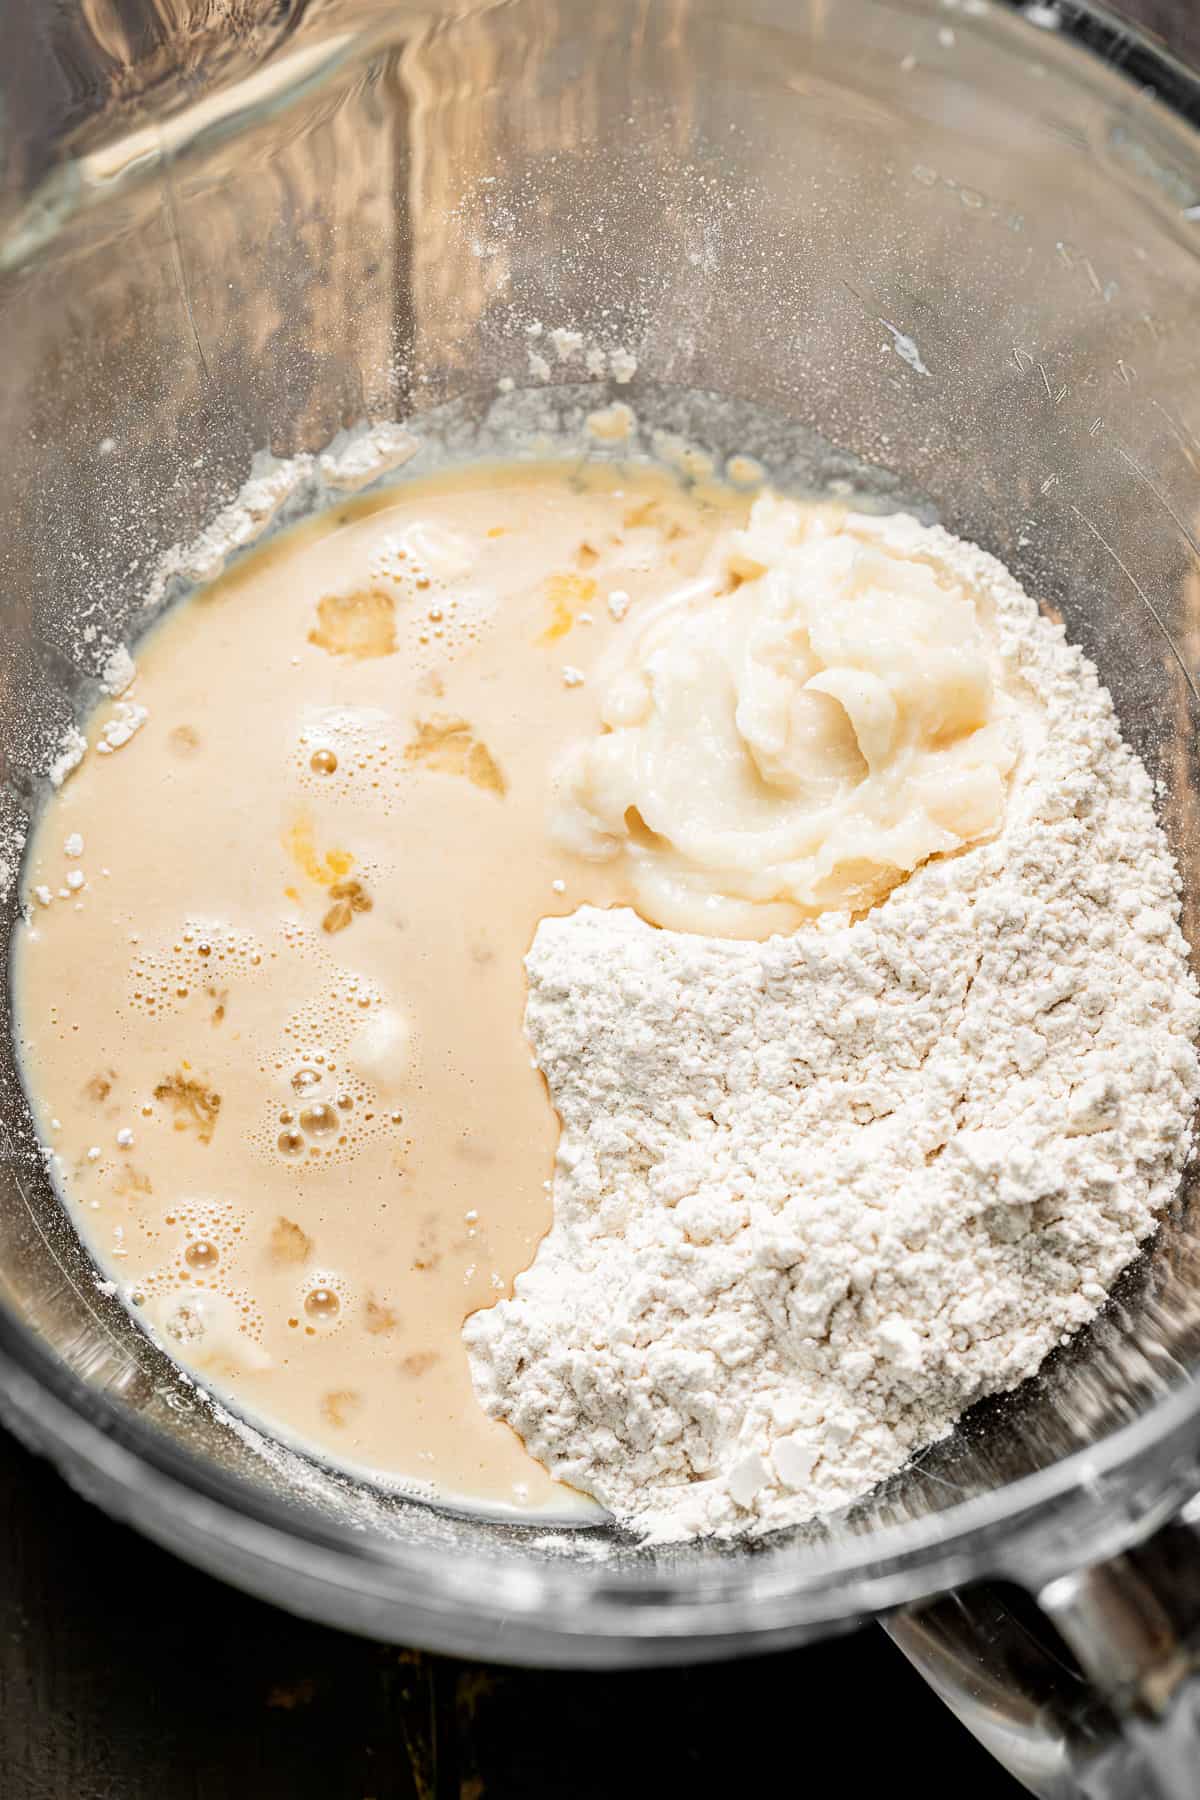 wet and dry ingredients for bun dough in a glass bowl.